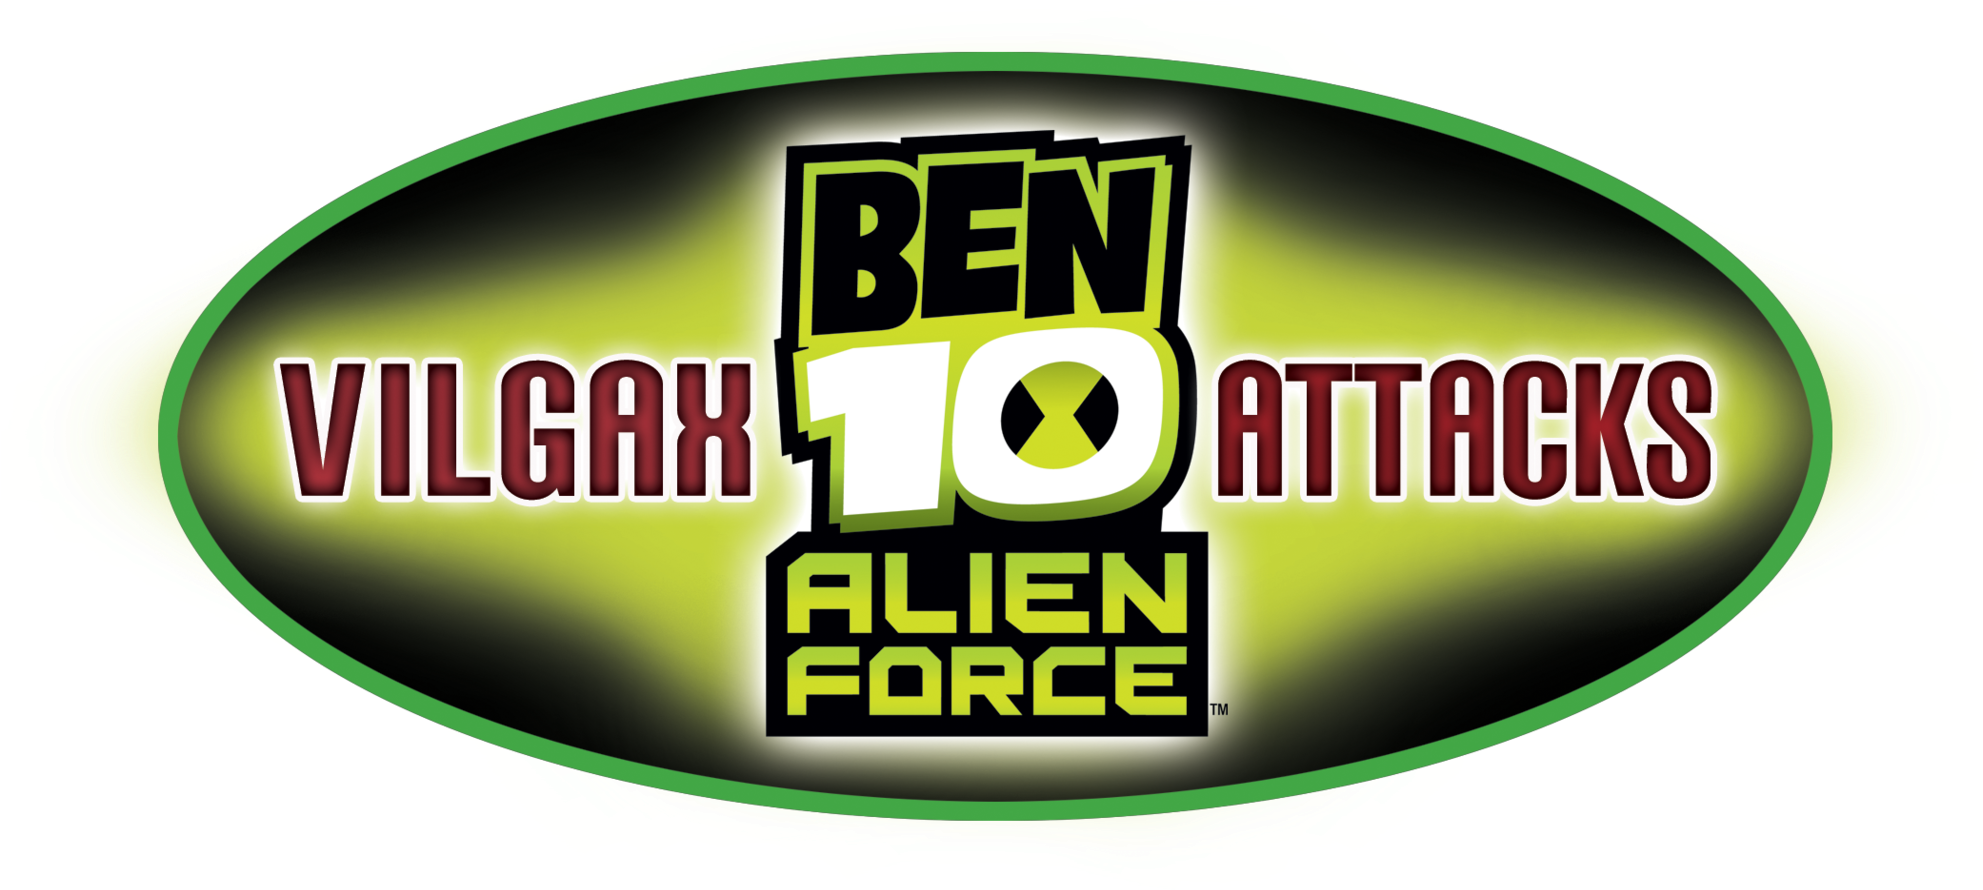 Ben 10 Alien Force Vilgax Attacks Icon (2000x948), Png Download